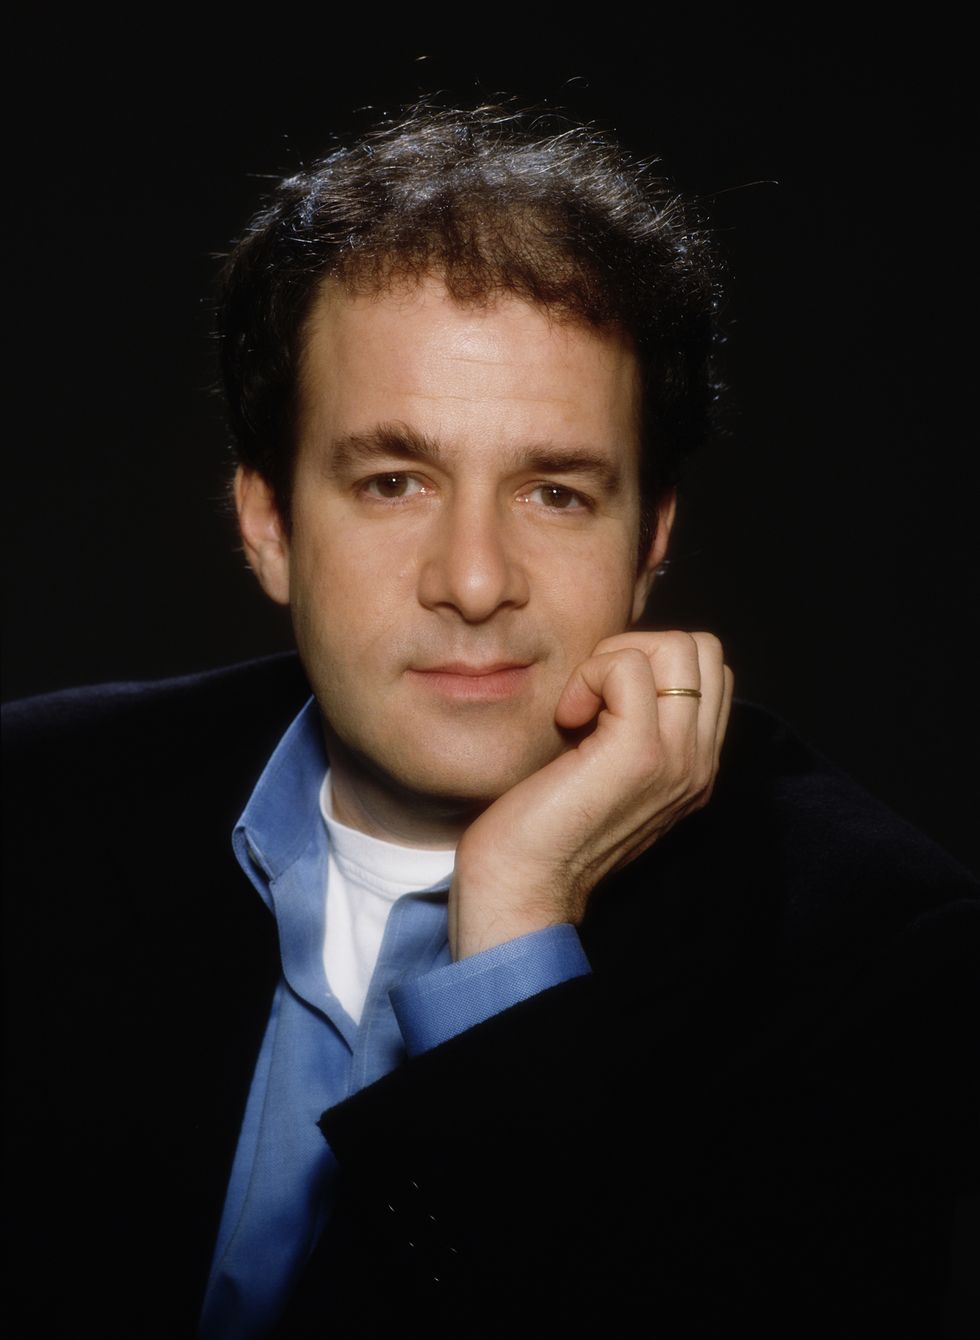 american writer bruce feirstein, screenwriter and co writer on the james bond films 'the world is not enough', 'tomorrow never dies' and 'goldeneye', circa 1997 photo by keith hamsheregetty images